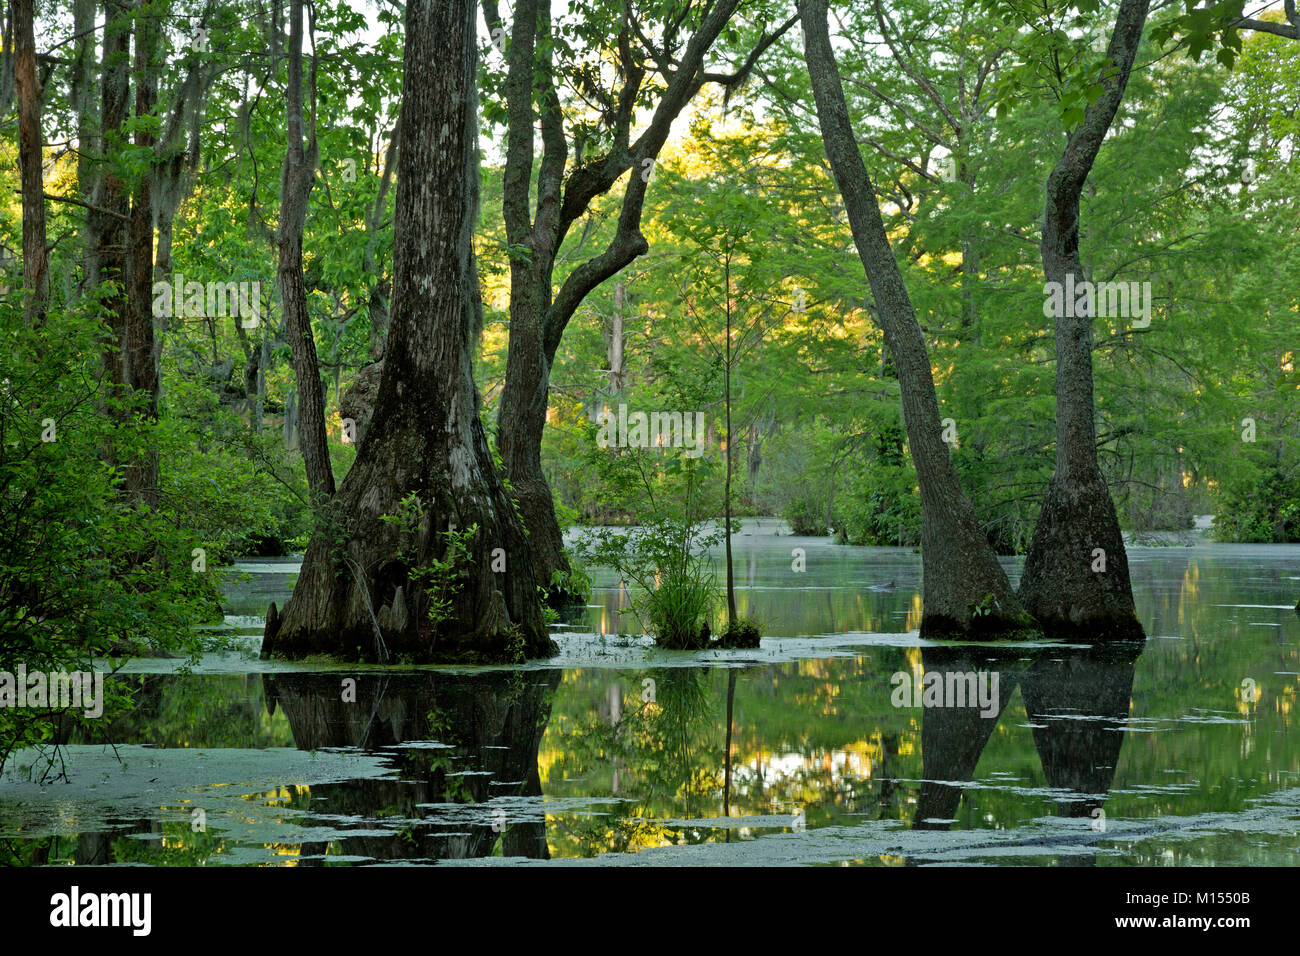 NC01485-00...NORTH CAROLINA - Bald cypress and tupalo gum trees surrounded by a floating mat of duckweed in Merchant Millpond; at Merchant Millpond St Stock Photo